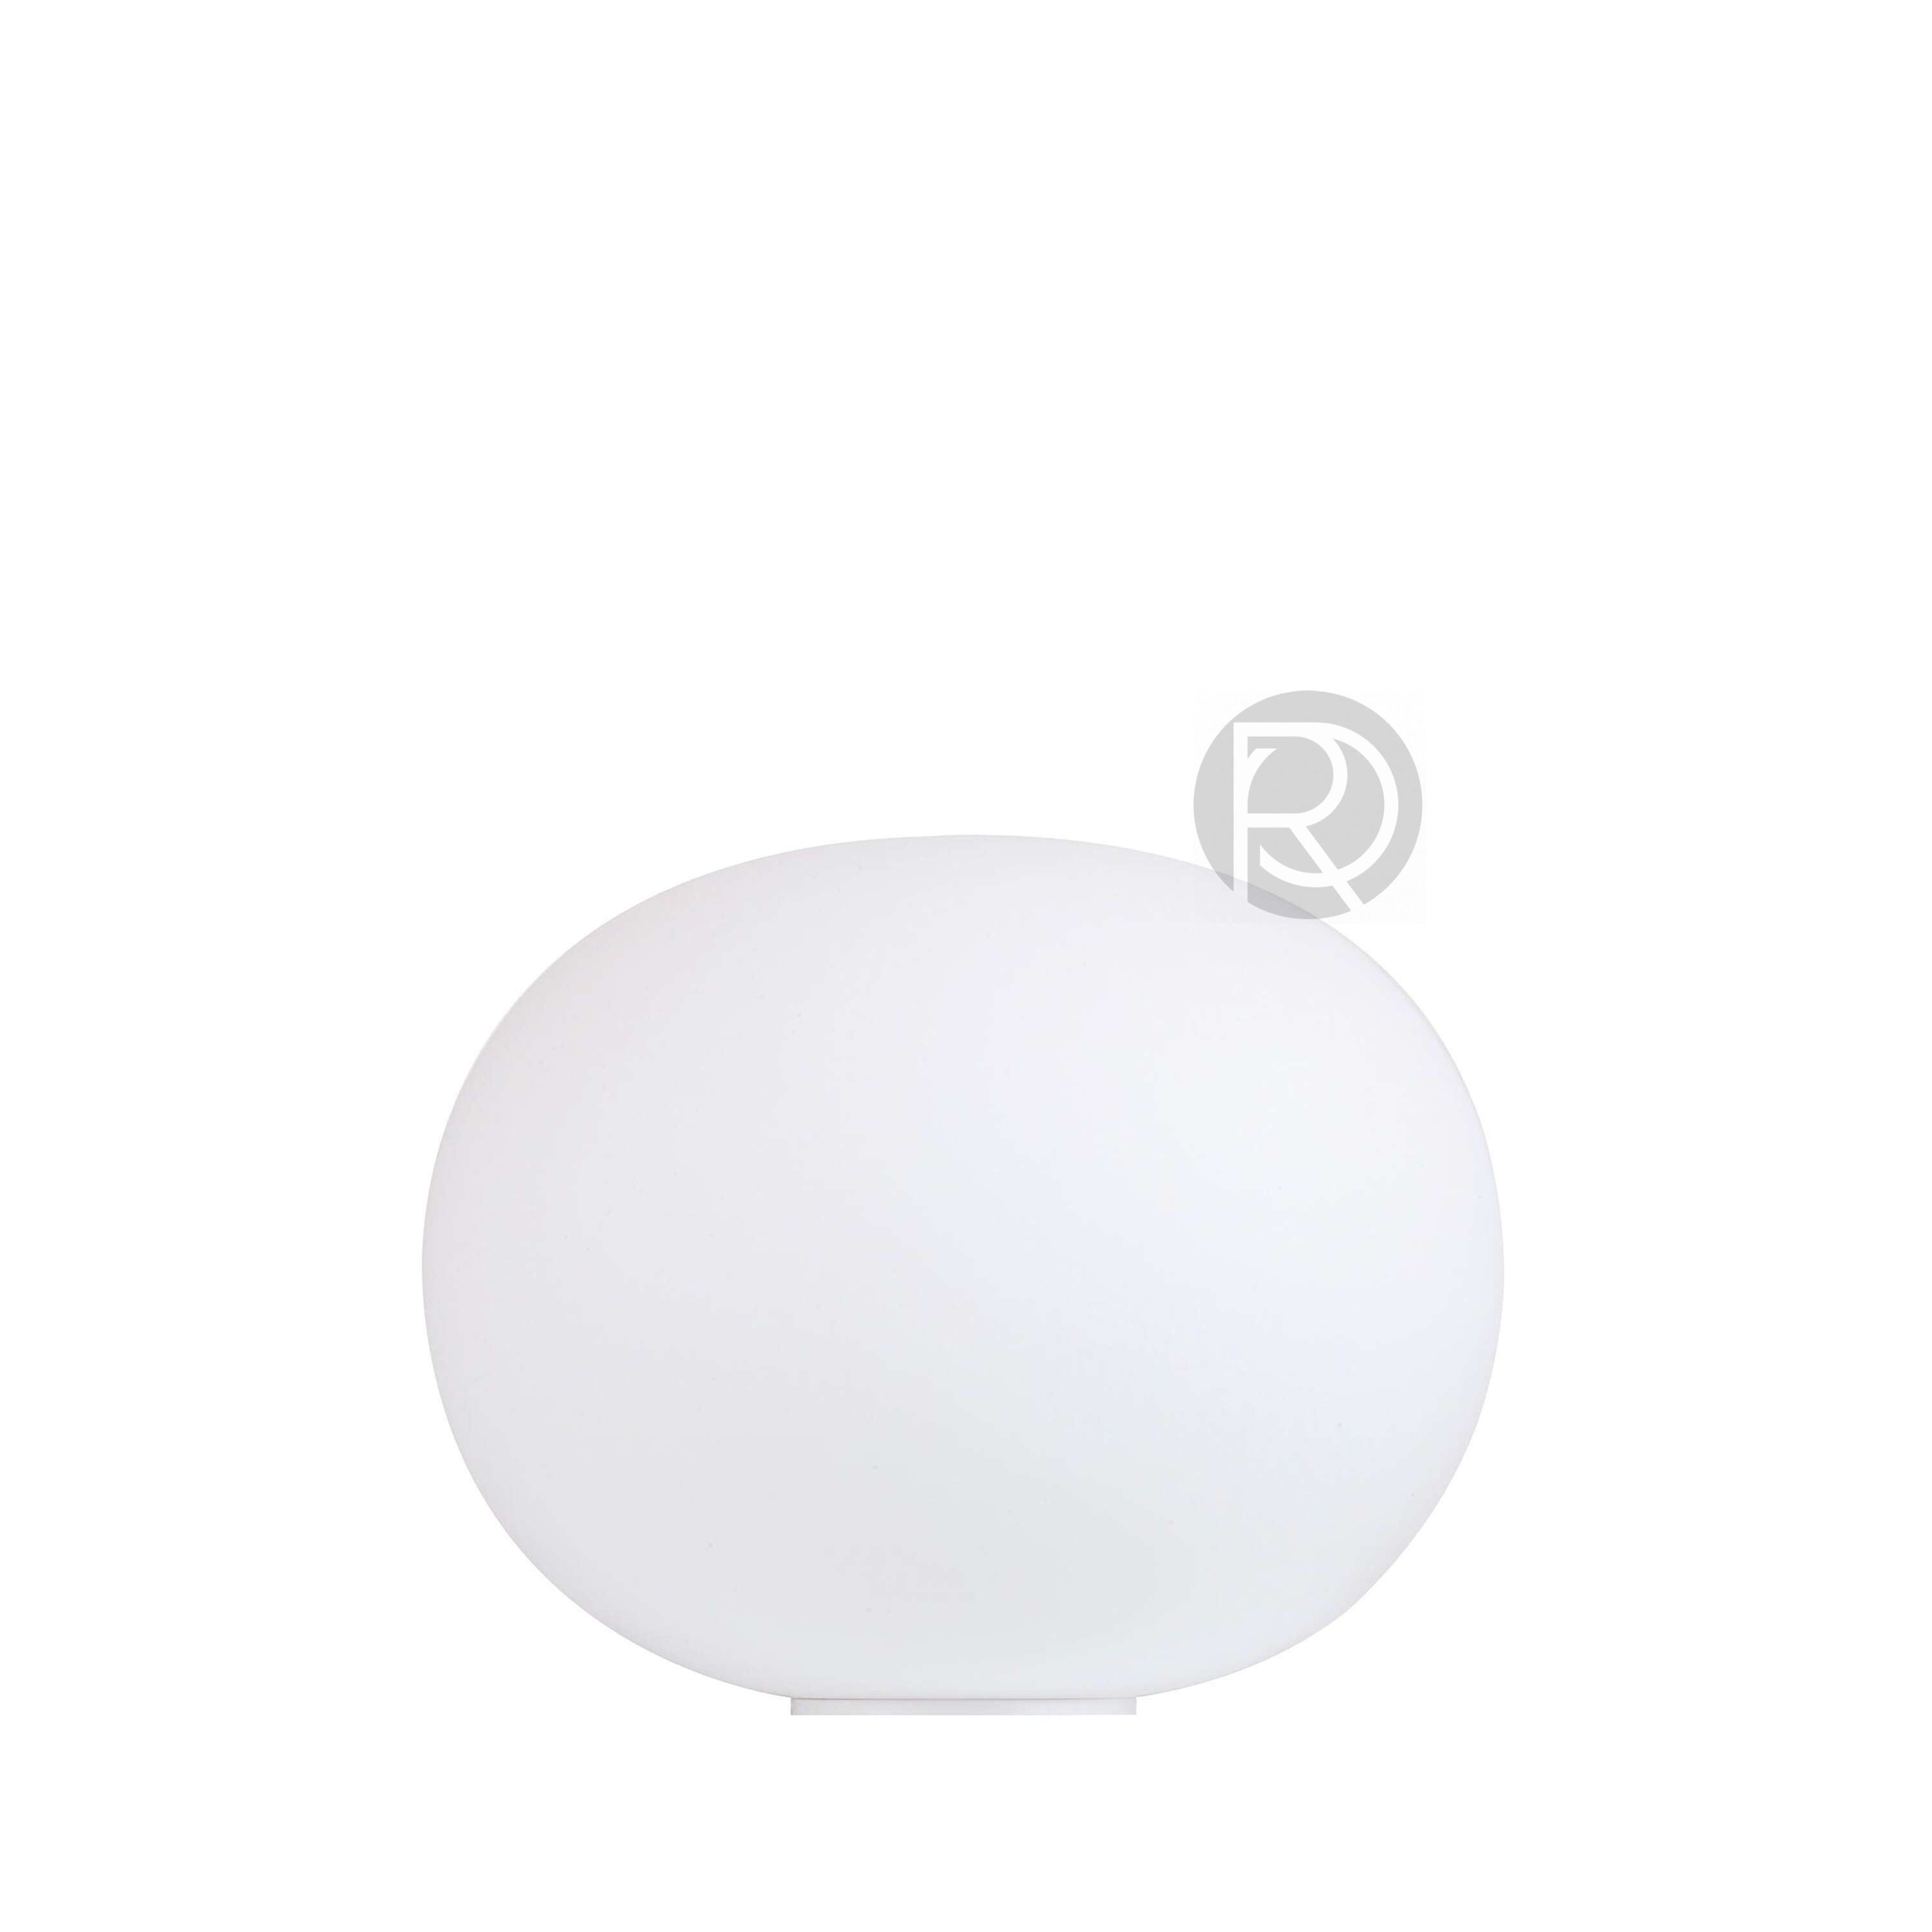 Table lamp GLO BALL by Flos